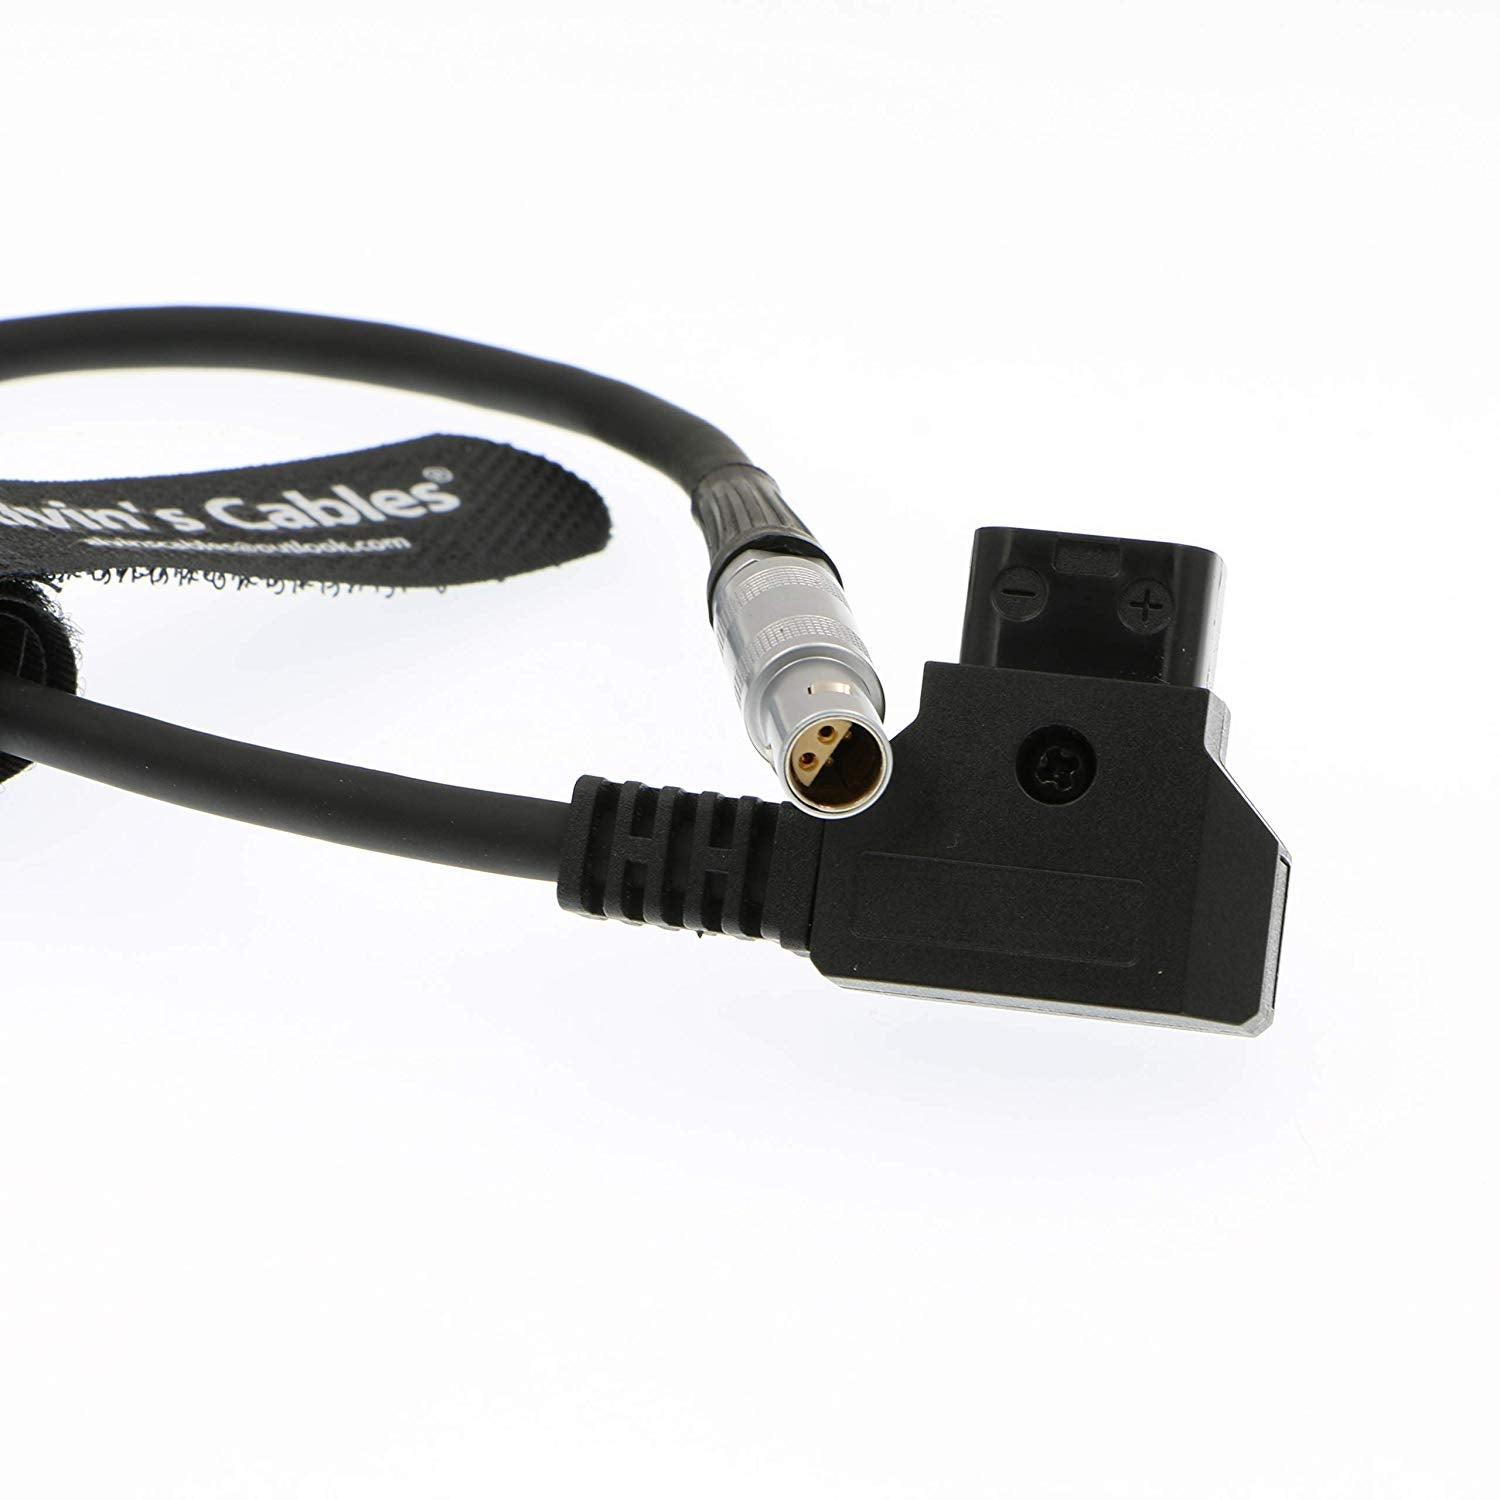 Alvin's Cables 4 Pin FFA 0S 304 to D Tap Power Cable for Z Cam E2 Camera